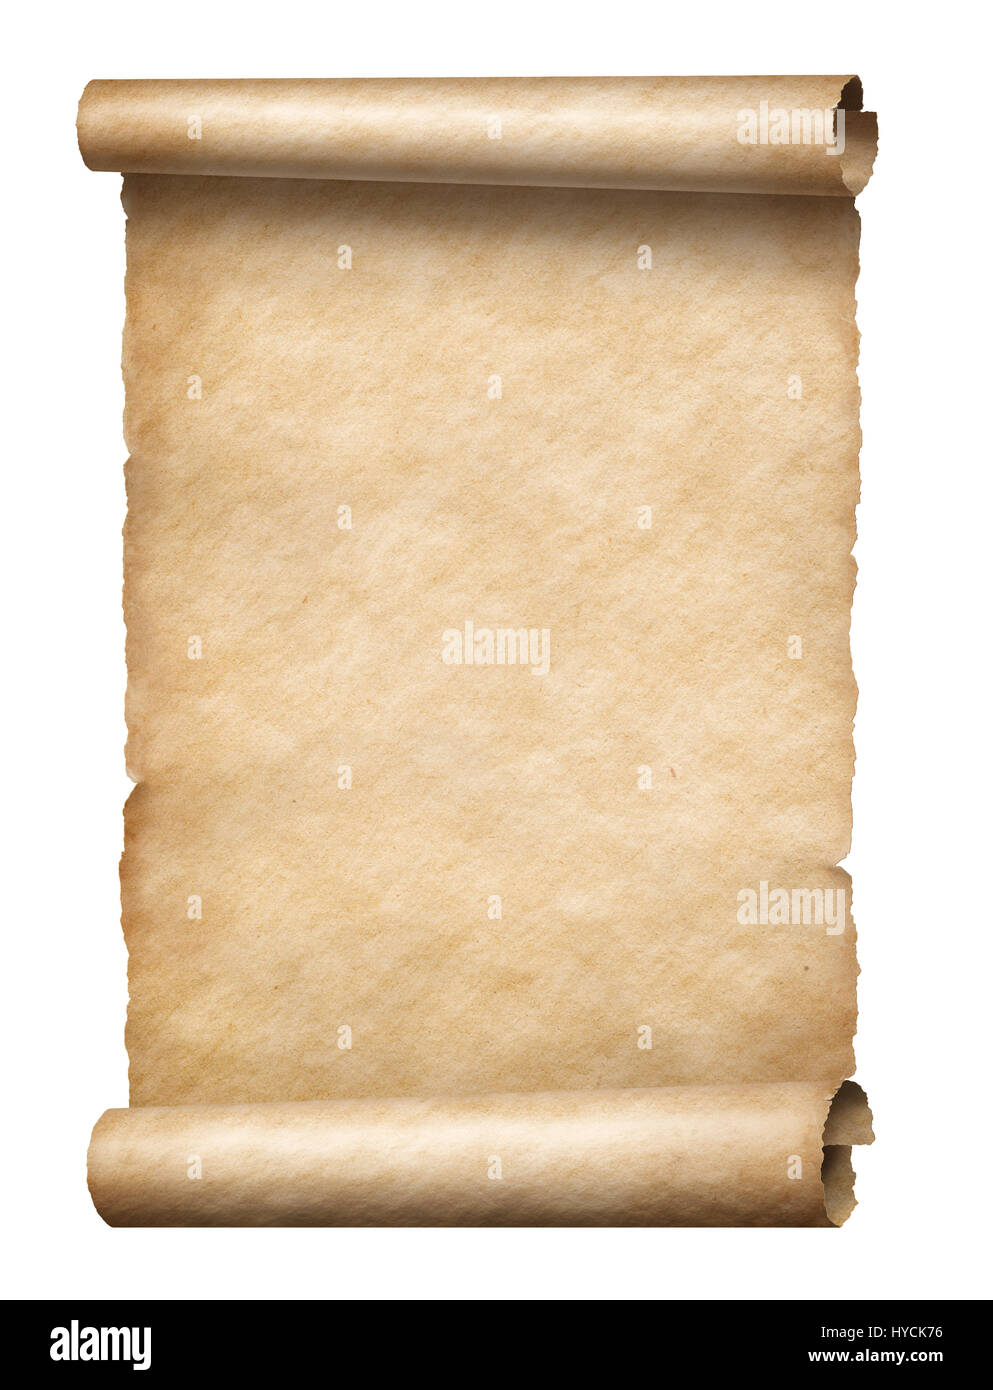 https://c8.alamy.com/comp/HYCK76/old-paper-manusript-scroll-isolated-on-white-vertically-oriented-HYCK76.jpg